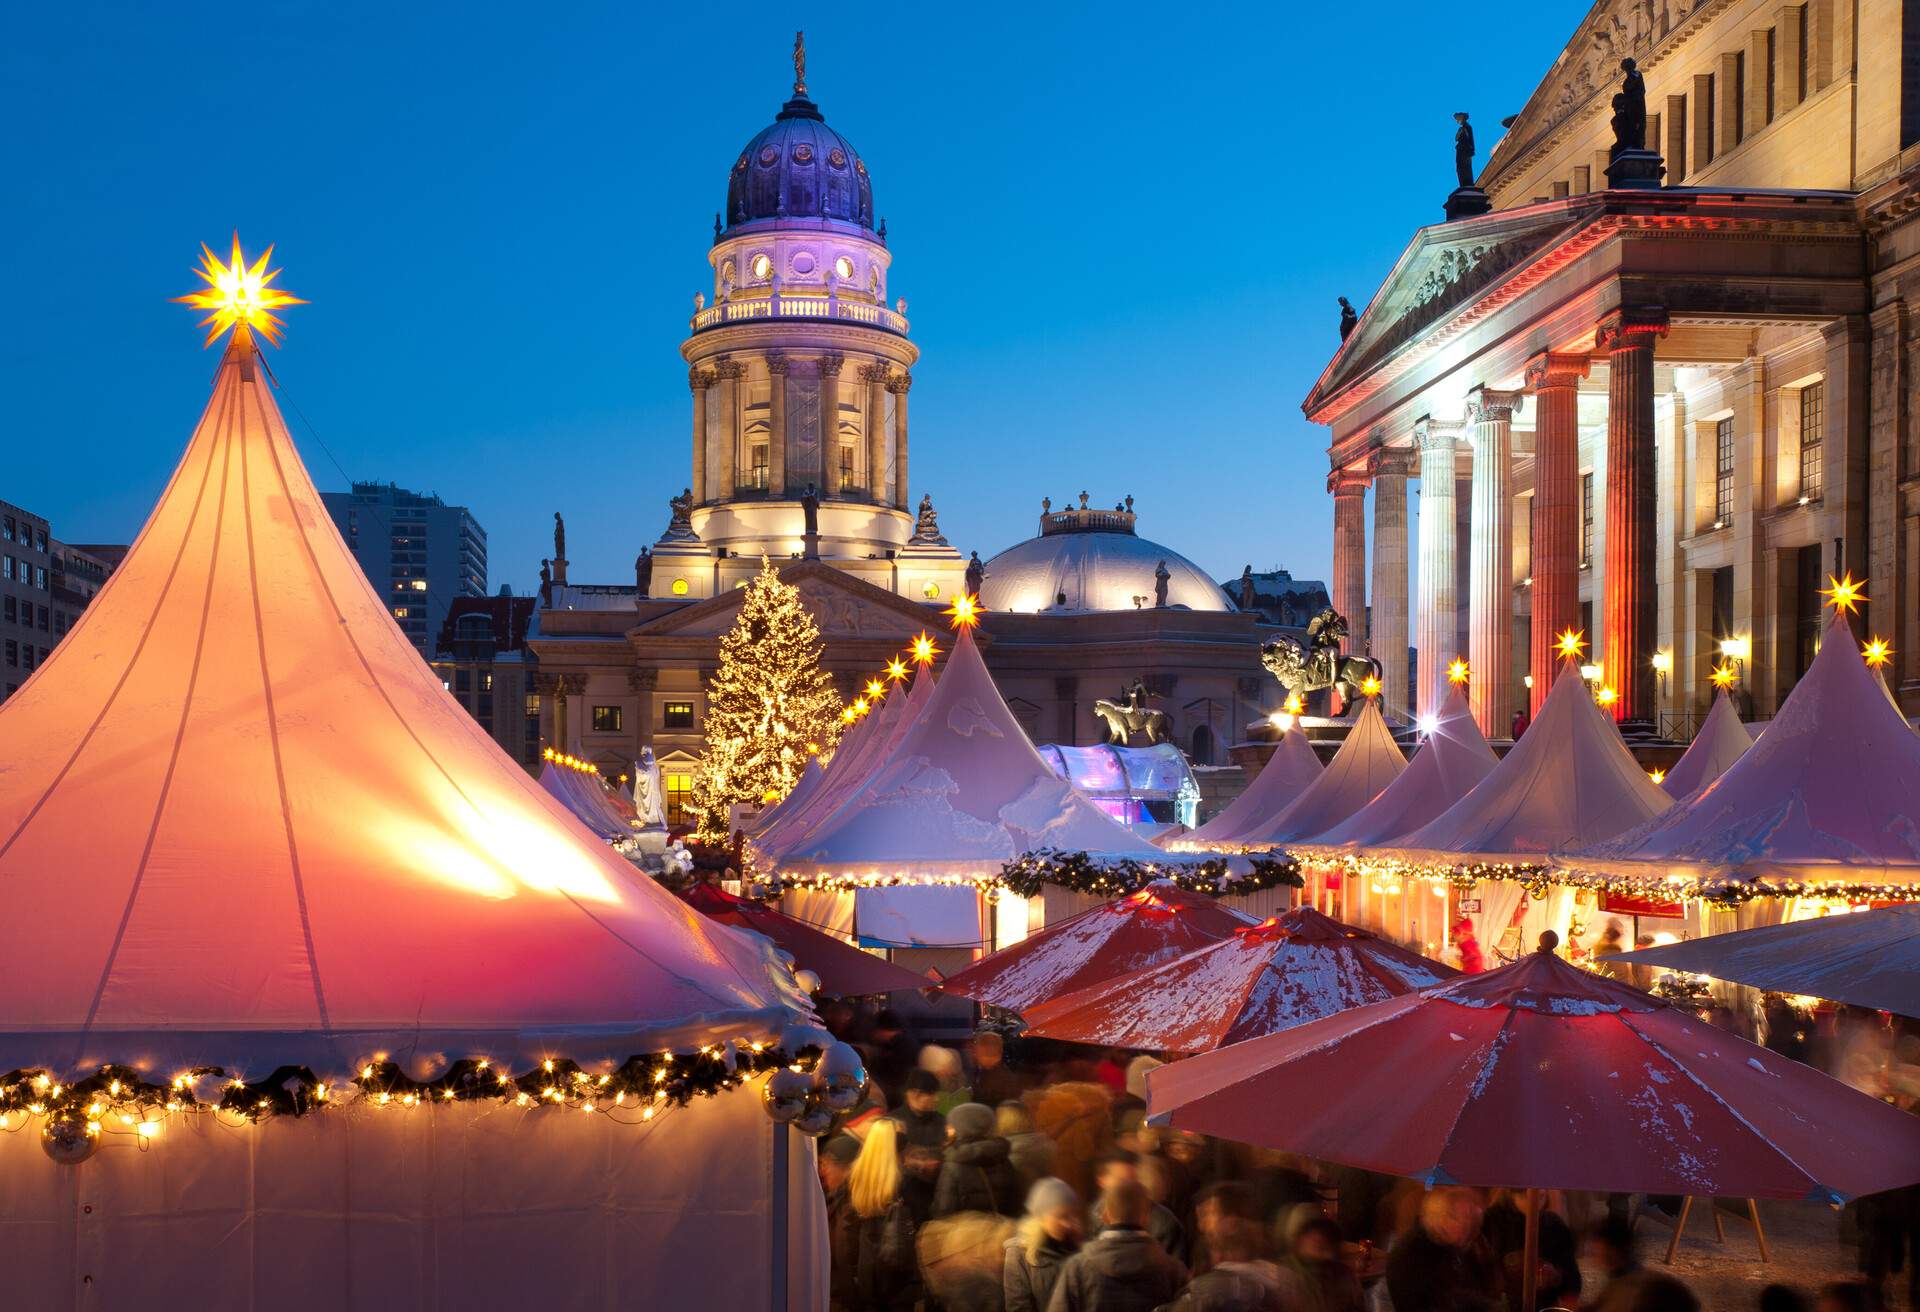 A church tower overlooking the Christmas market shops with star-topped white pagoda tents.